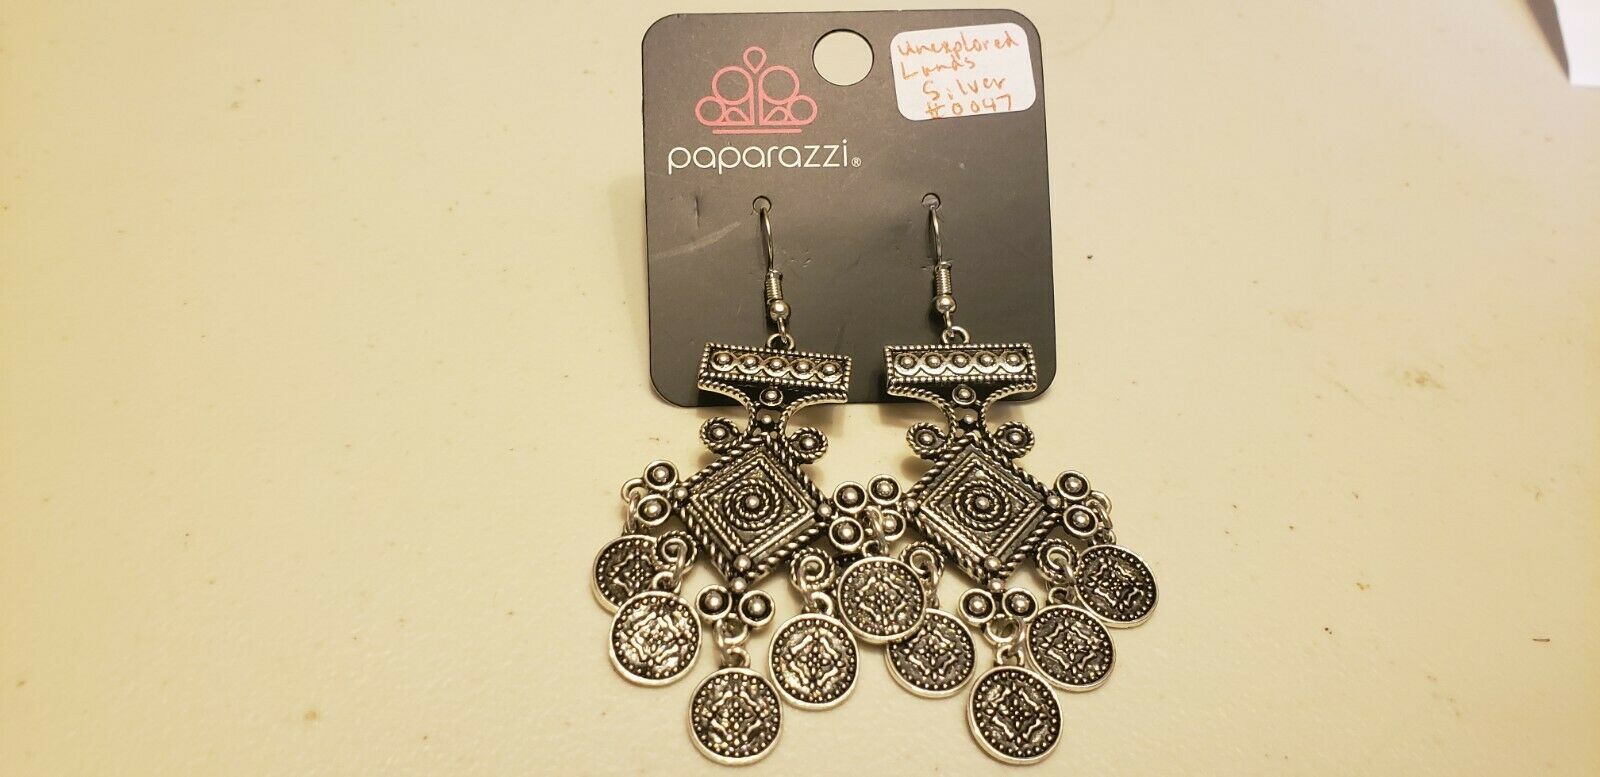 Paparazzi Earrings (new) UNEXPLORED LANDS SILVER #0047 - $8.58